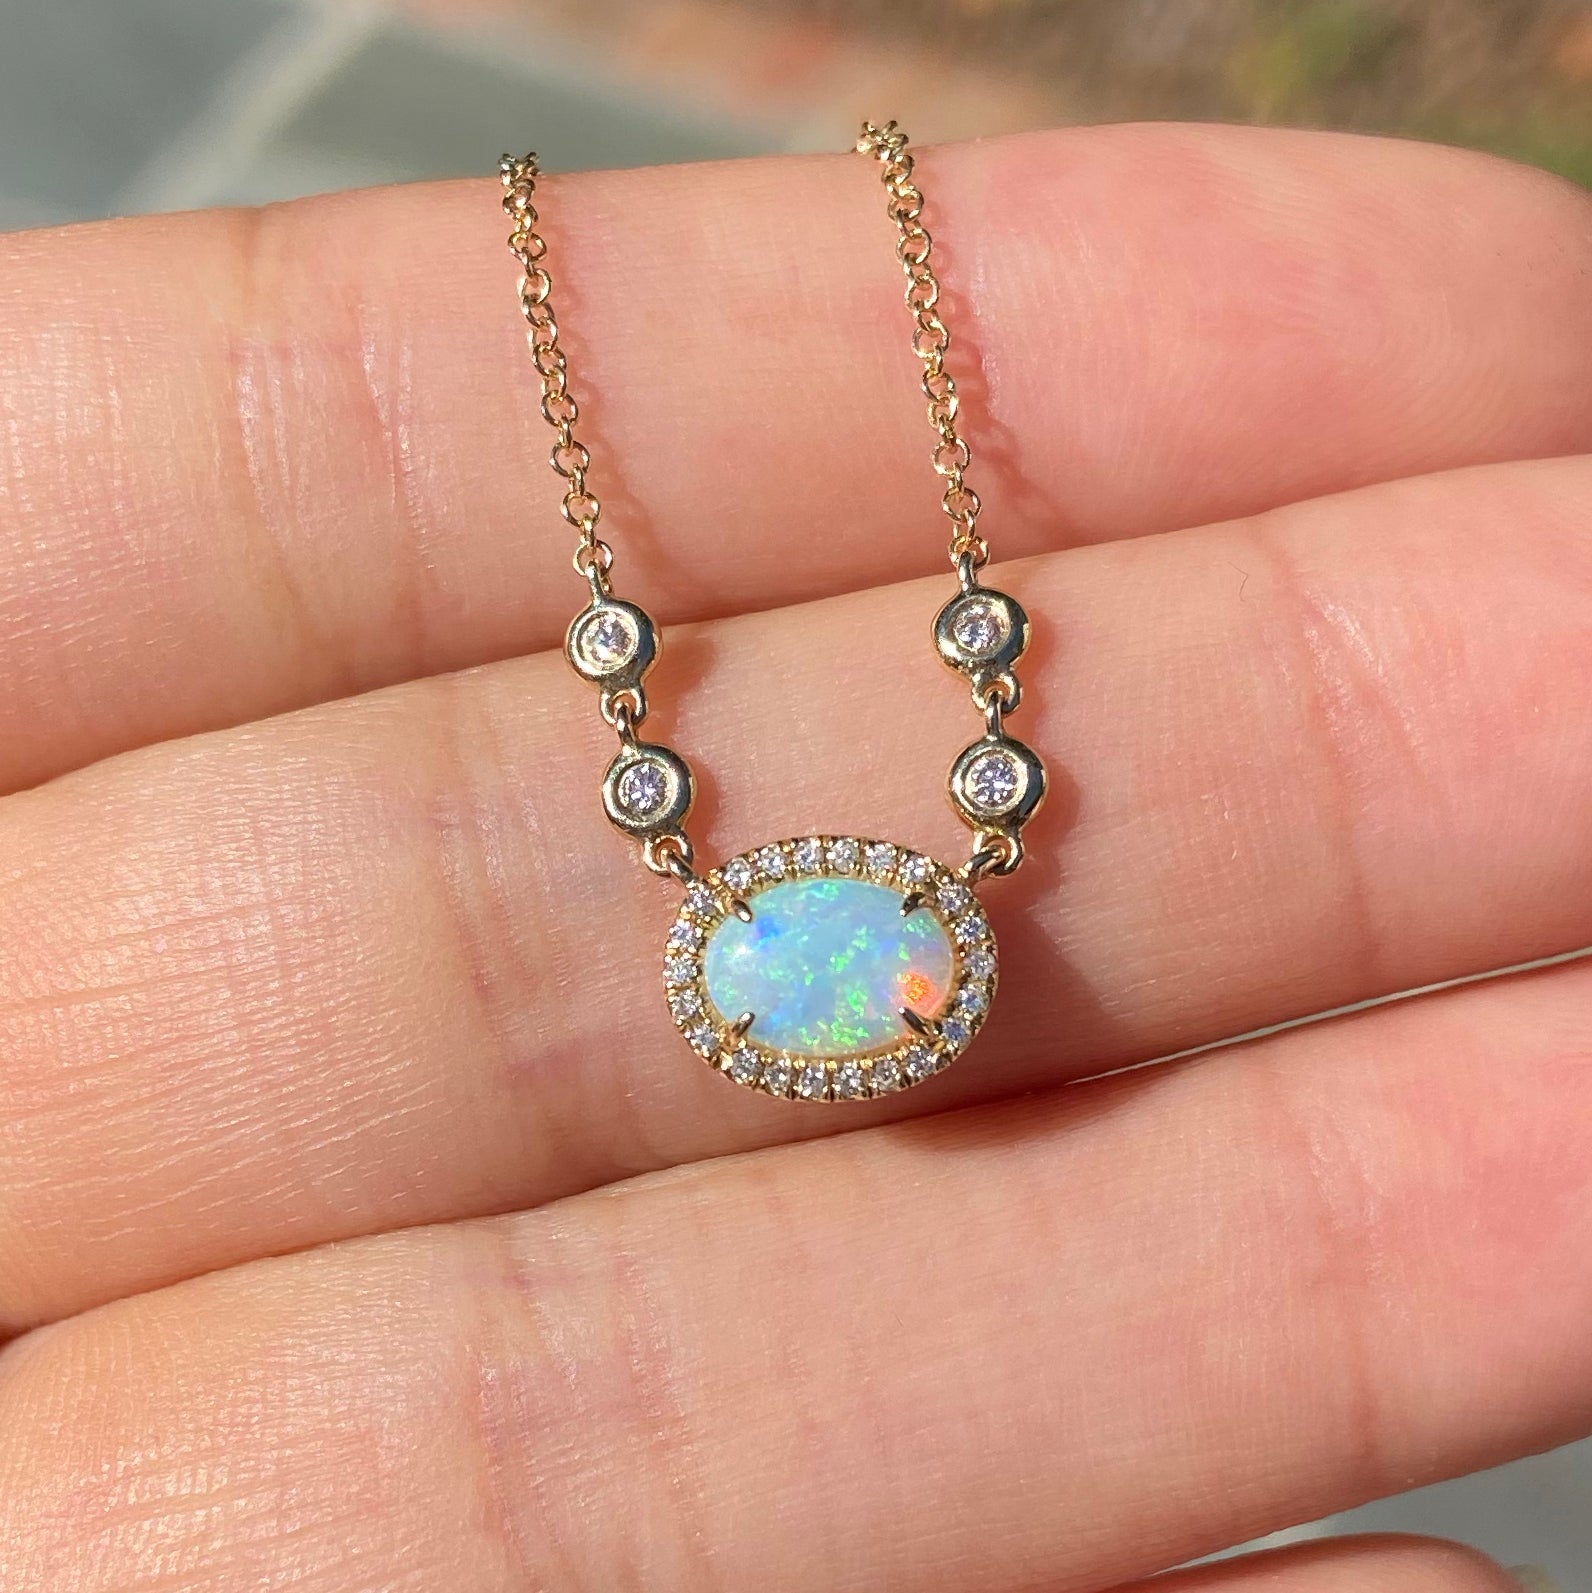 Buy Opal Diamond Necklace / Natural Diamond Necklace/ 14k Gold Australian  Opal / White Opal Necklace / Gold Opal Pendant / October Birthstone Online  in India - Etsy